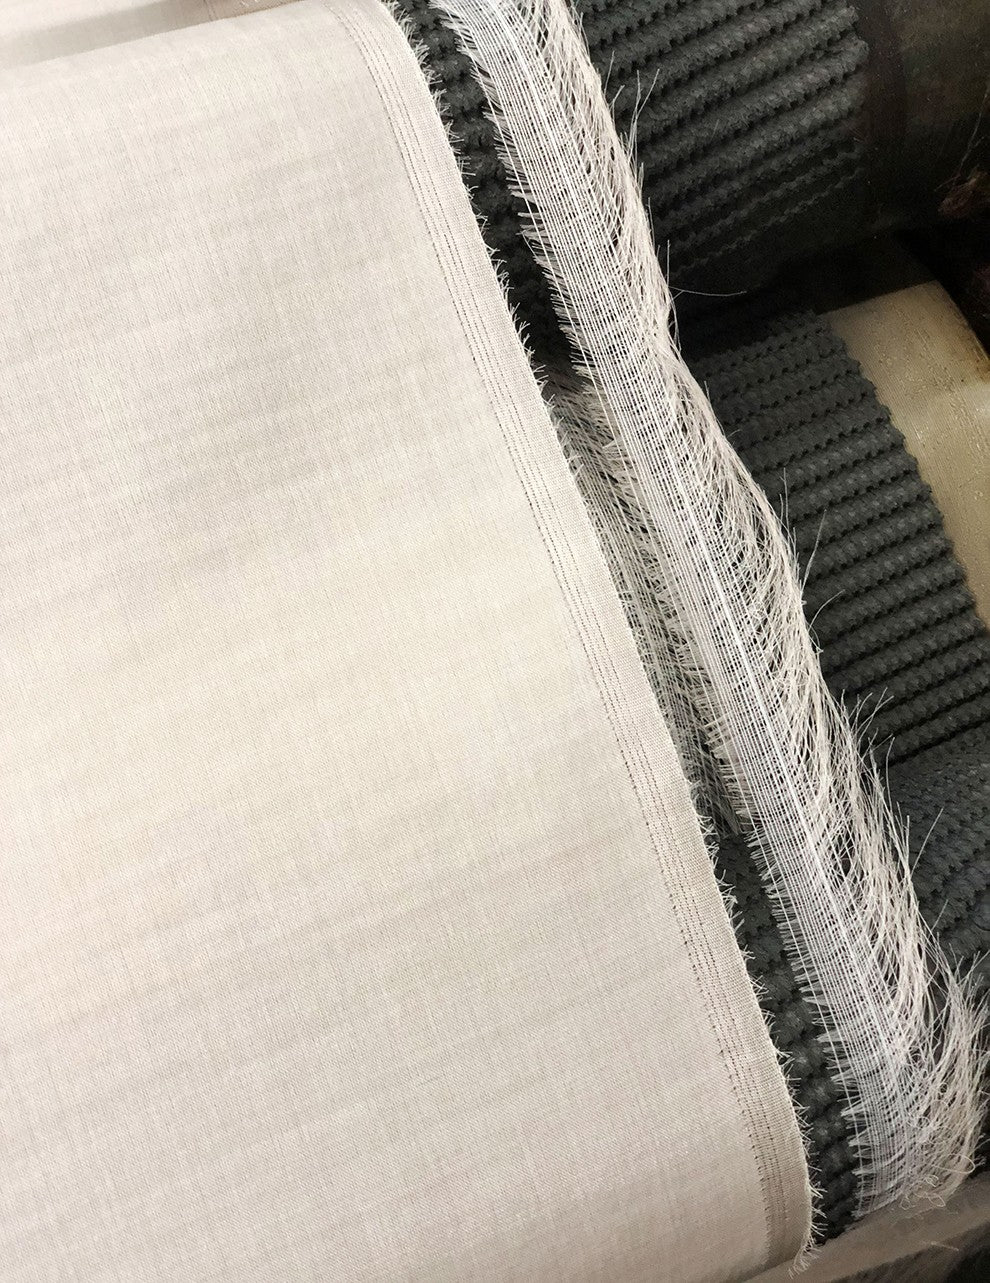 Rolled fabrics with frayed edges on display